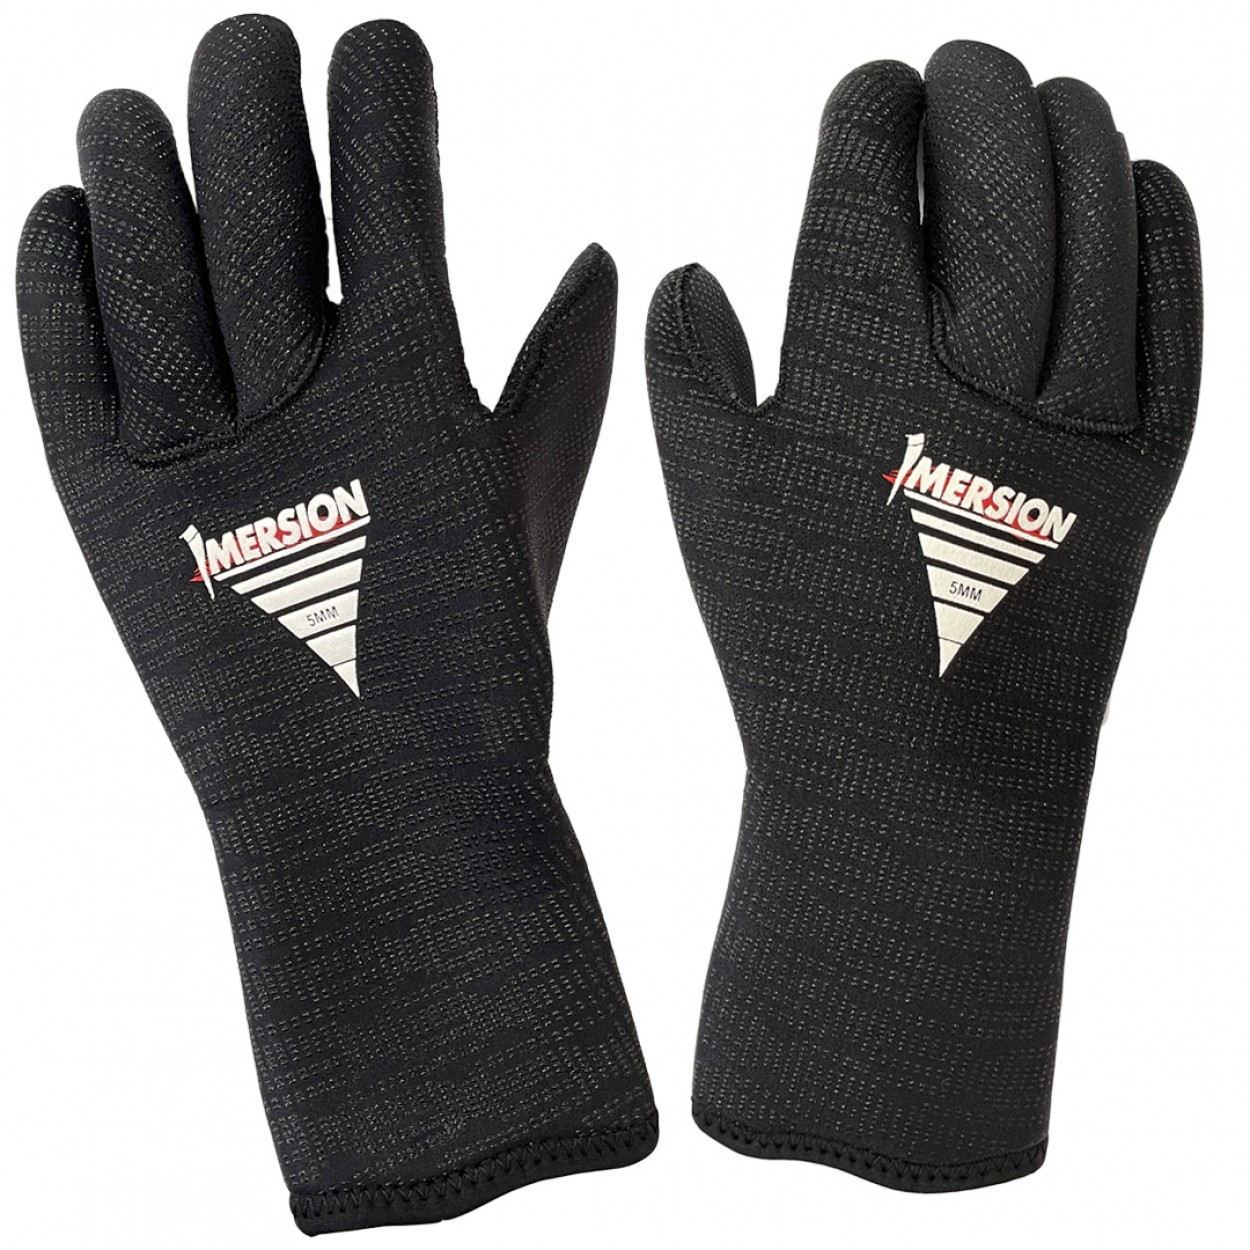 Imersion 5mm Wetsuit Gloves